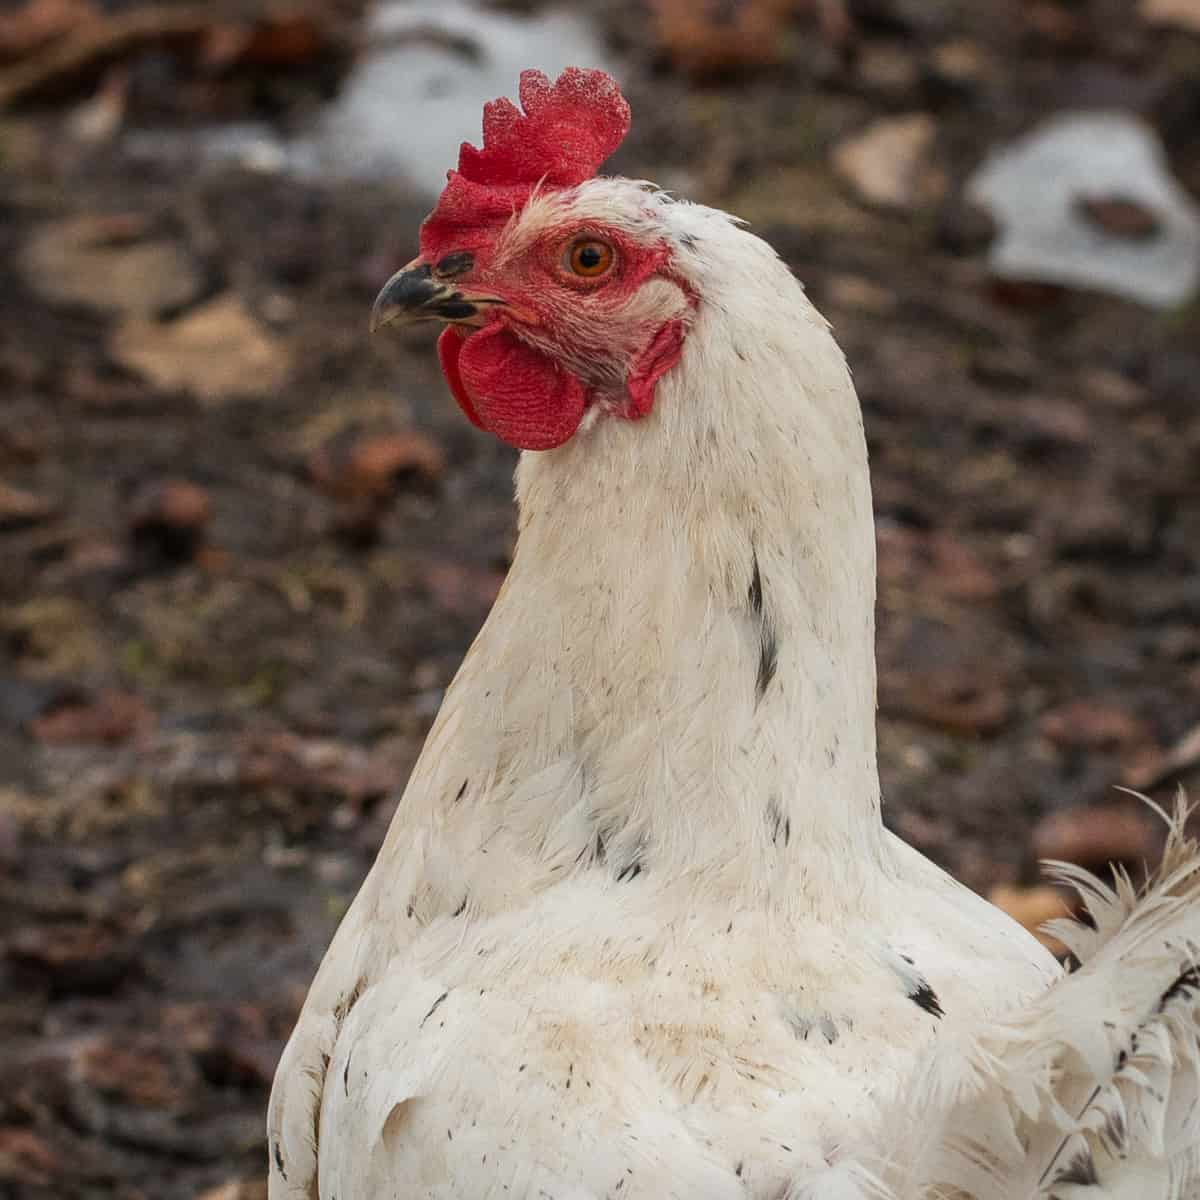 a chicken with white feathers eating in a yard 